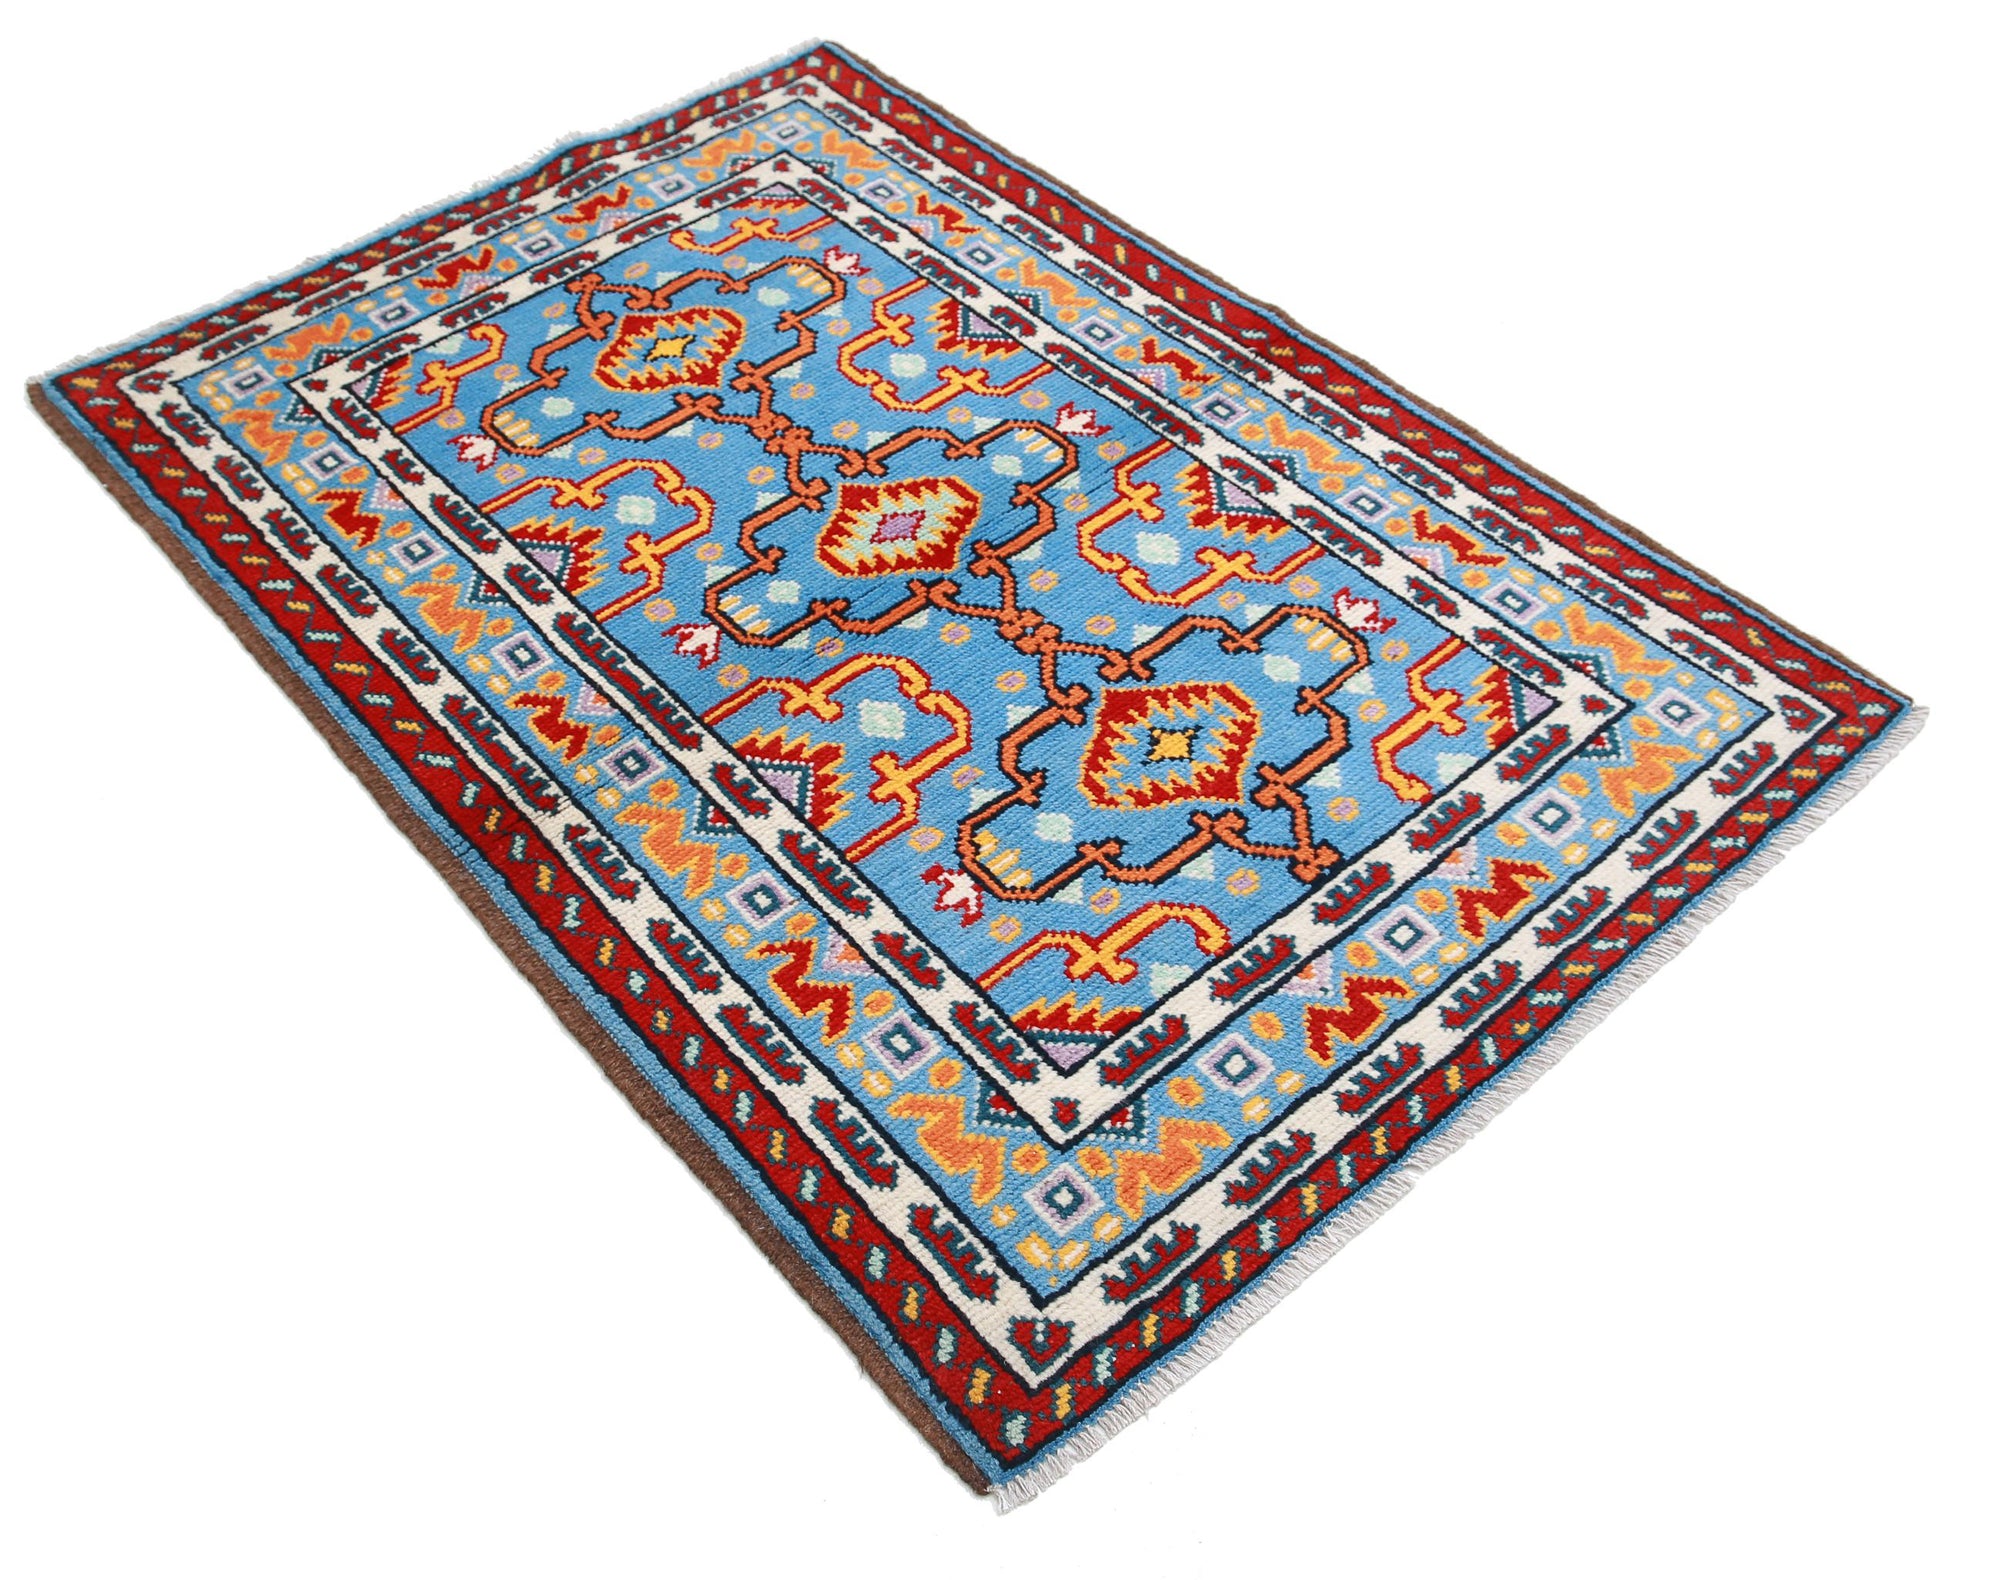 Revival-hand-knotted-qarghani-wool-rug-5014208-1.jpg